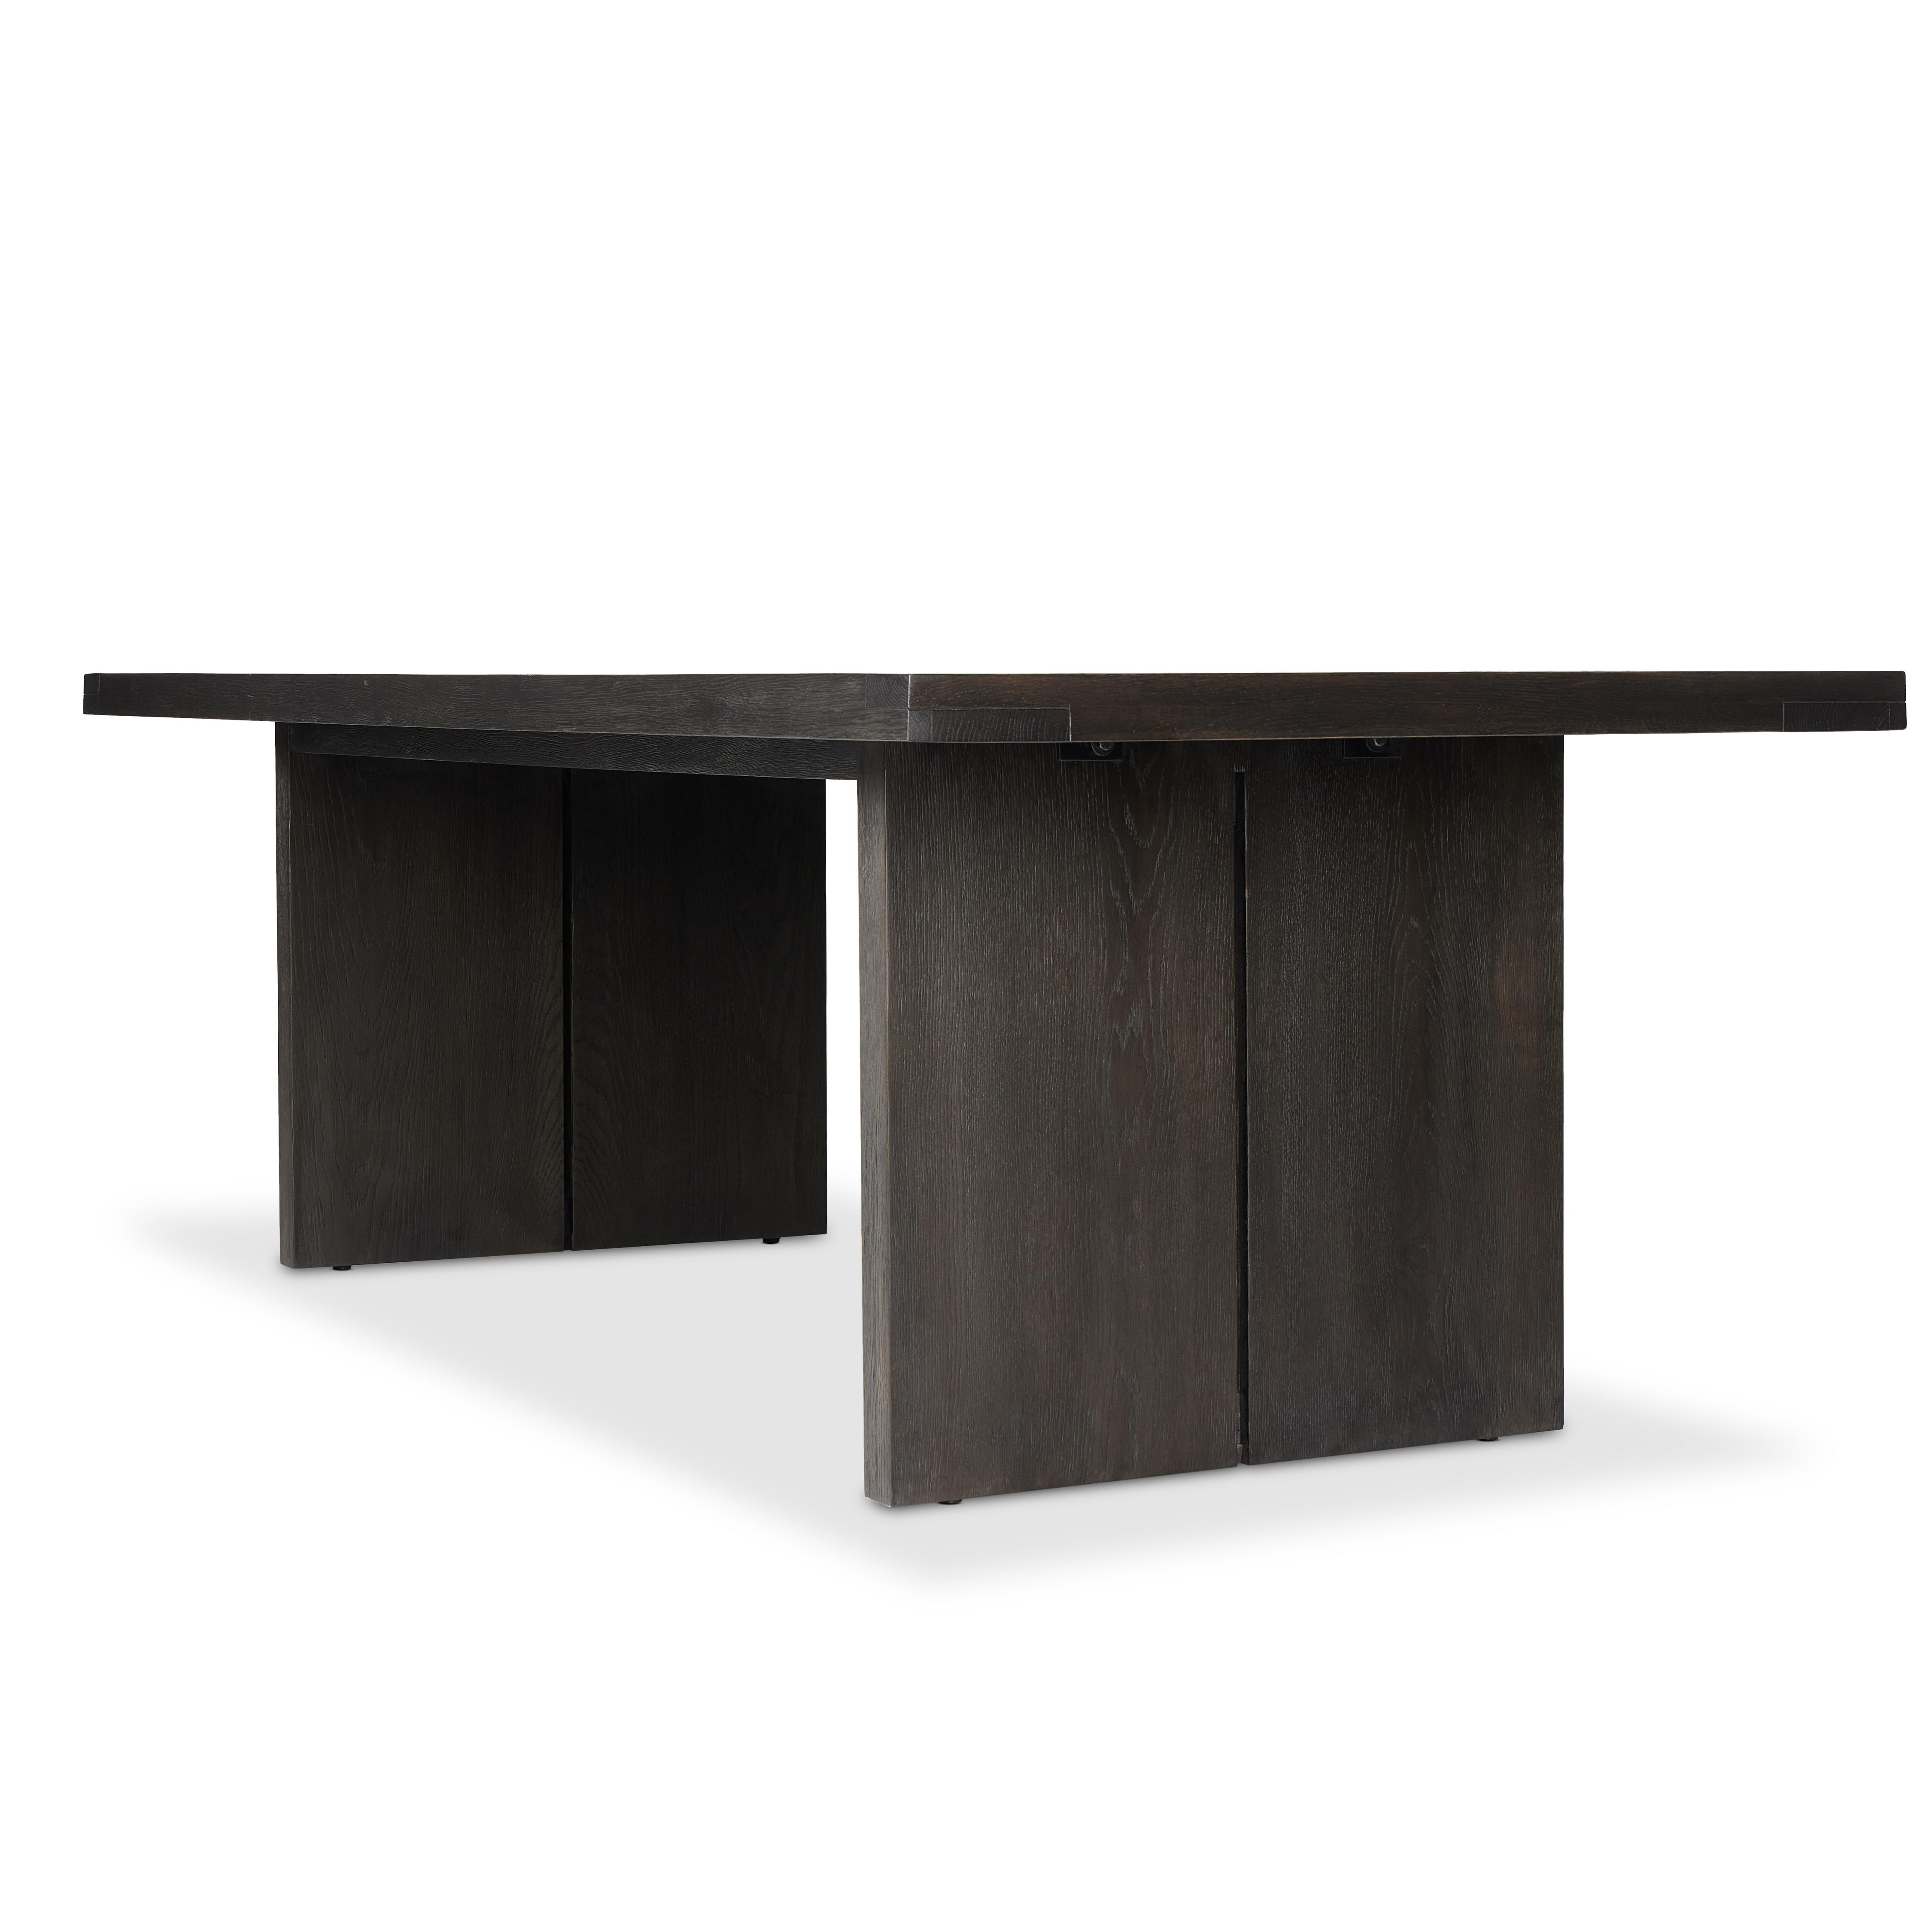 Warby Dining Table 94"-Worn Black Oak - Image 8